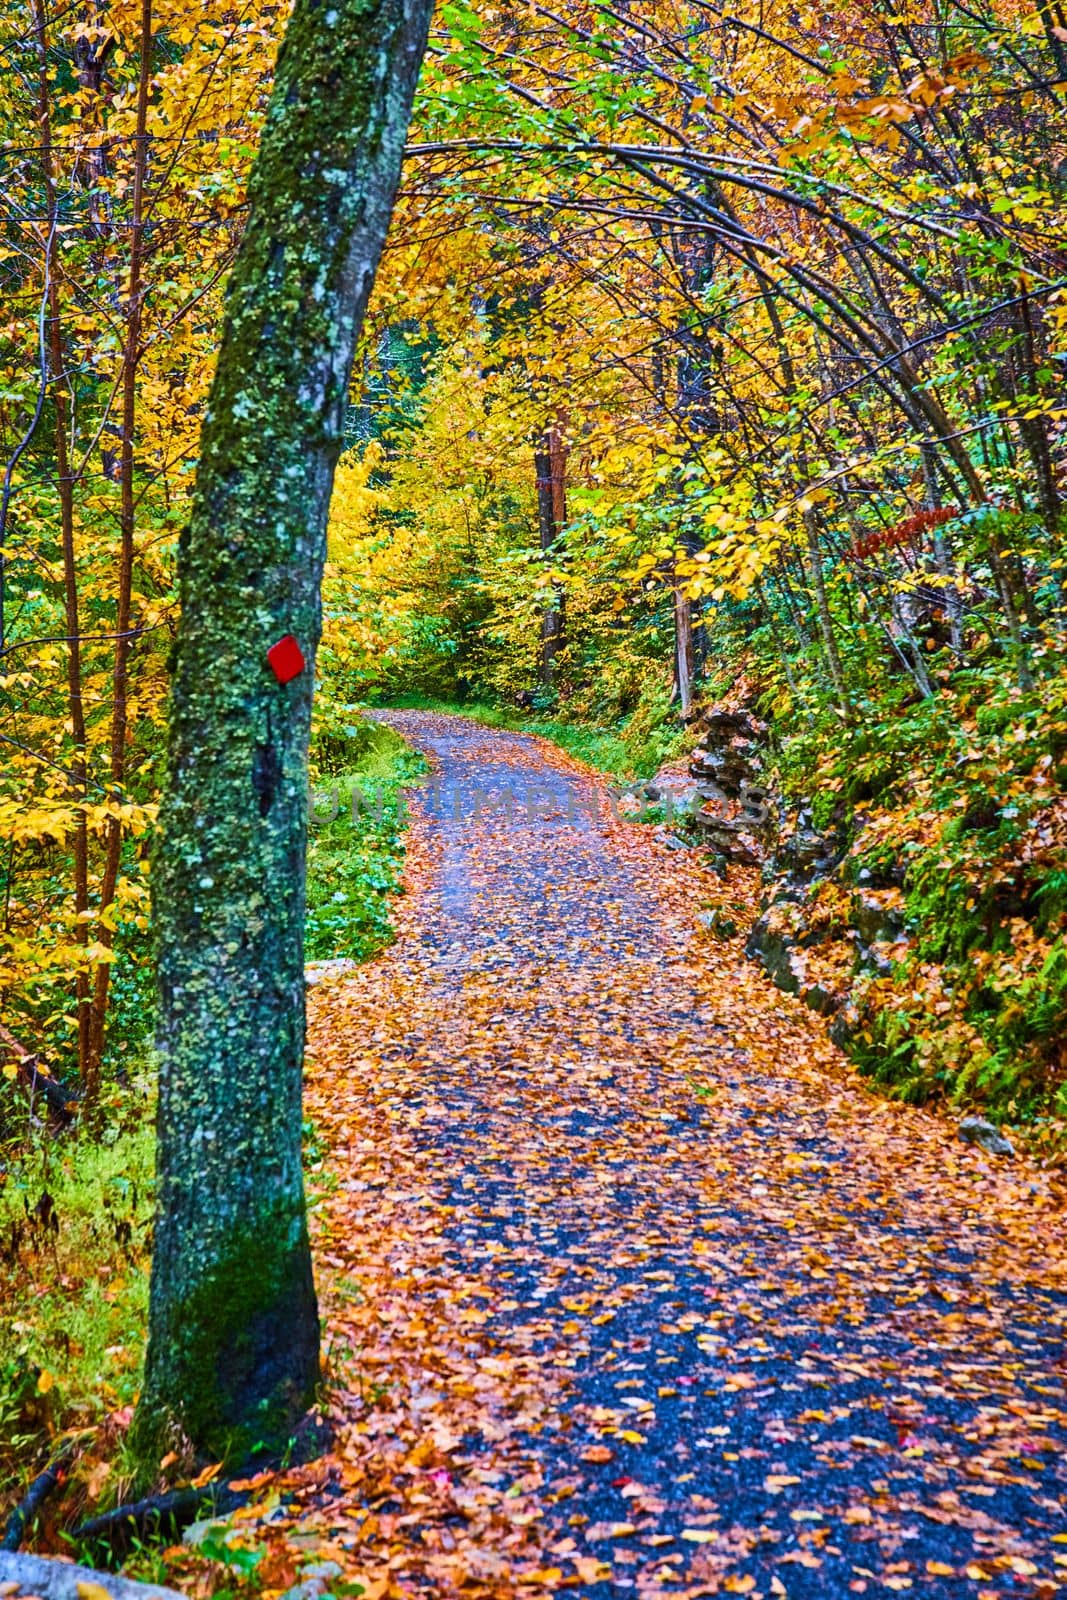 Image of Forest with hiking path covered in fall leaves and trail marker on nearby tree